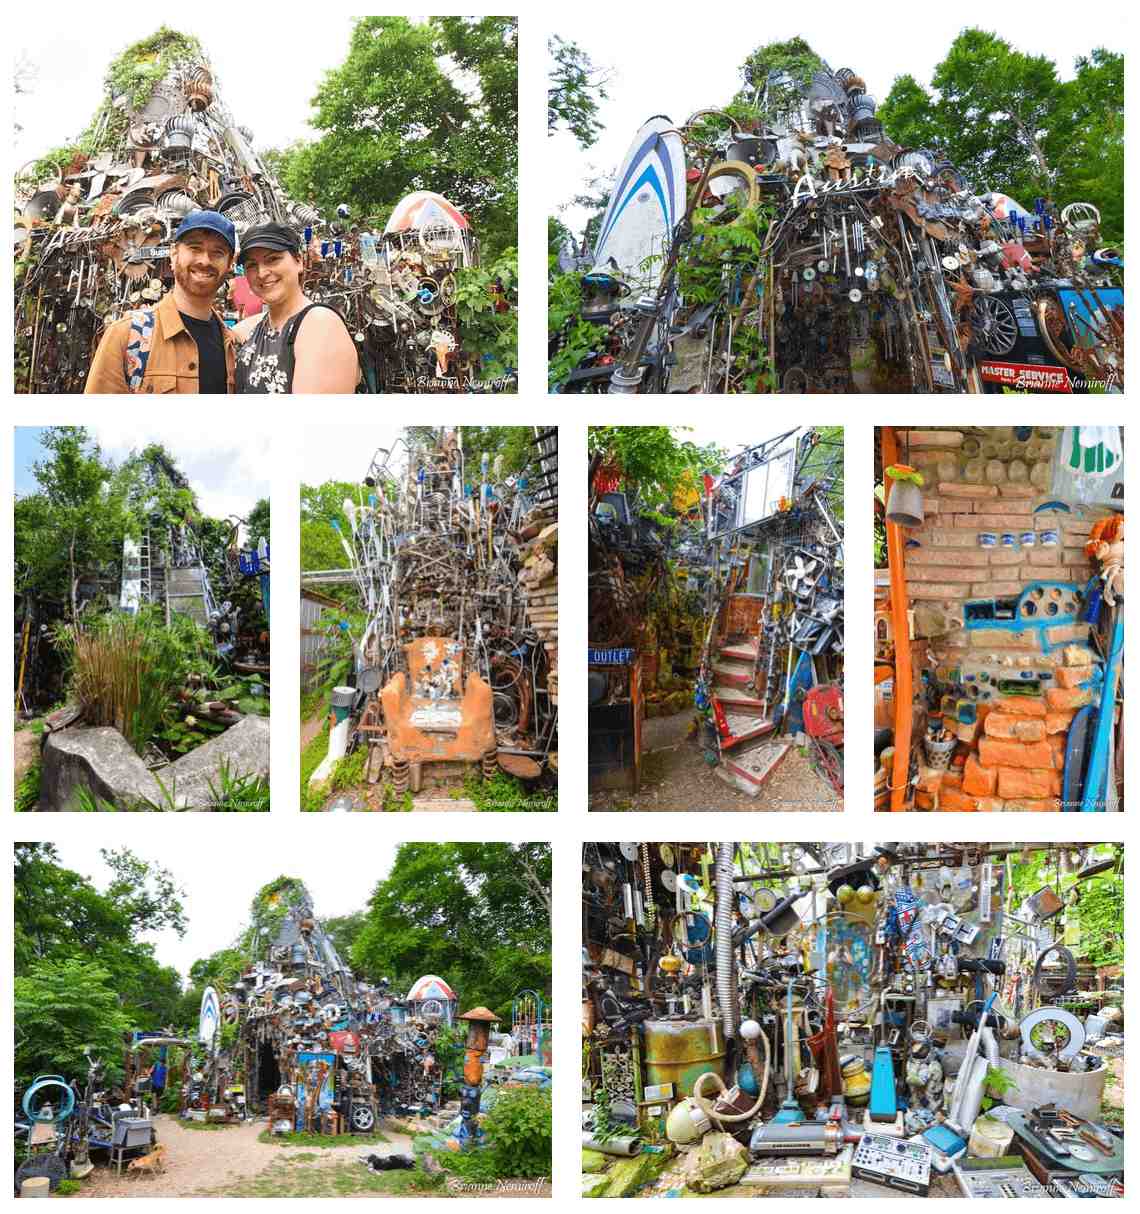 72 Hours in Austin, Texas- Cathedral of Junk